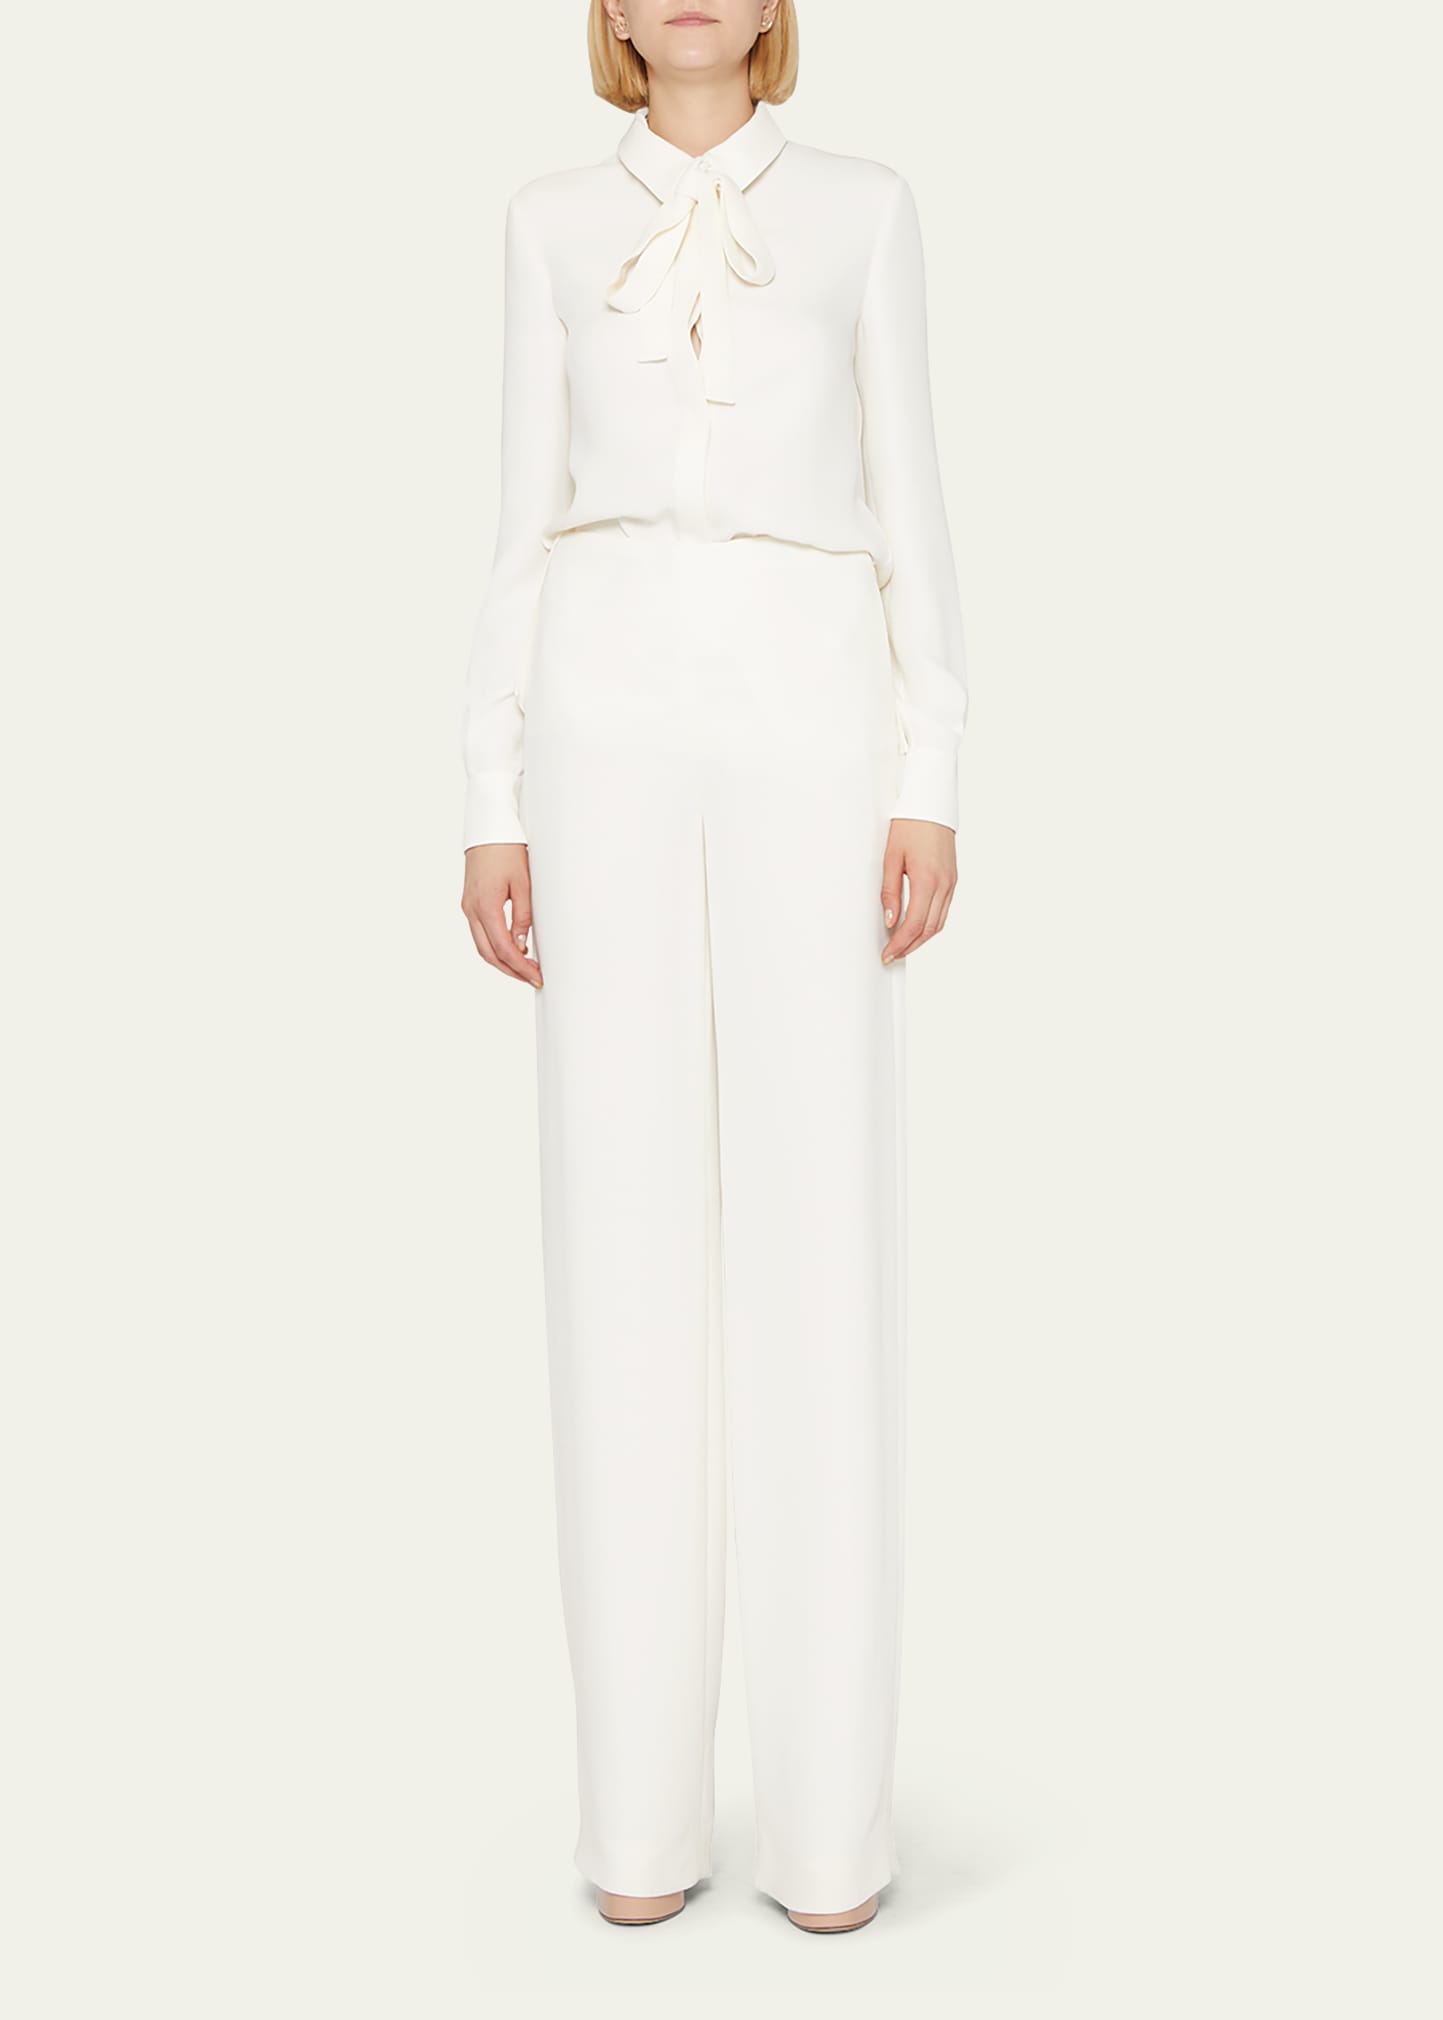 VALENTINO CADY COUTURE STRAIGHT-LEG SILK PANTS